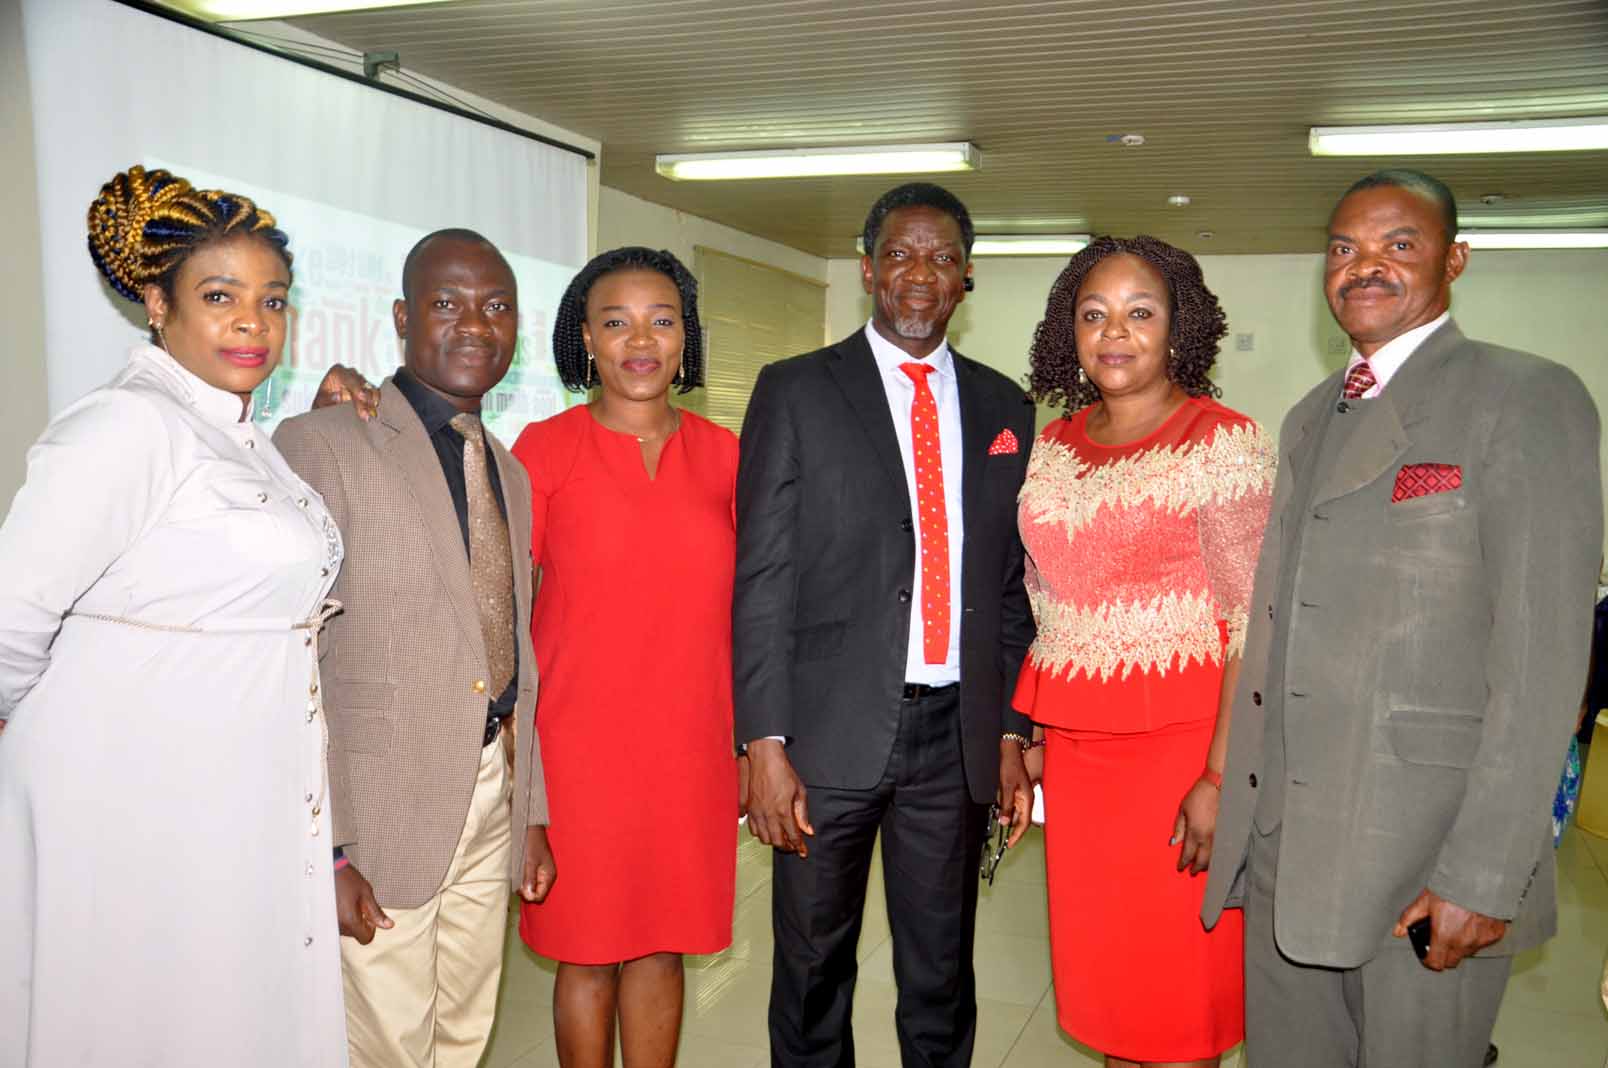 L-R: Mrs Toyin Adeseun-Nwosu, Public Relation Executive, Oladapo Soneye, Assistant General Secretary NIPR, Thelma Okoh, General Secretary, Olusegun Mcmedal, Chairman NIPR Lagos State Chapter, Mrs Confort Nwankwo,Vice Chairman and Kalu Olekauwa,Treasurer during the Inaugural Press Briefing of Nigeria institute of Public Relation (NIPR)Lagos State Chapter New EXCO in Lagos.